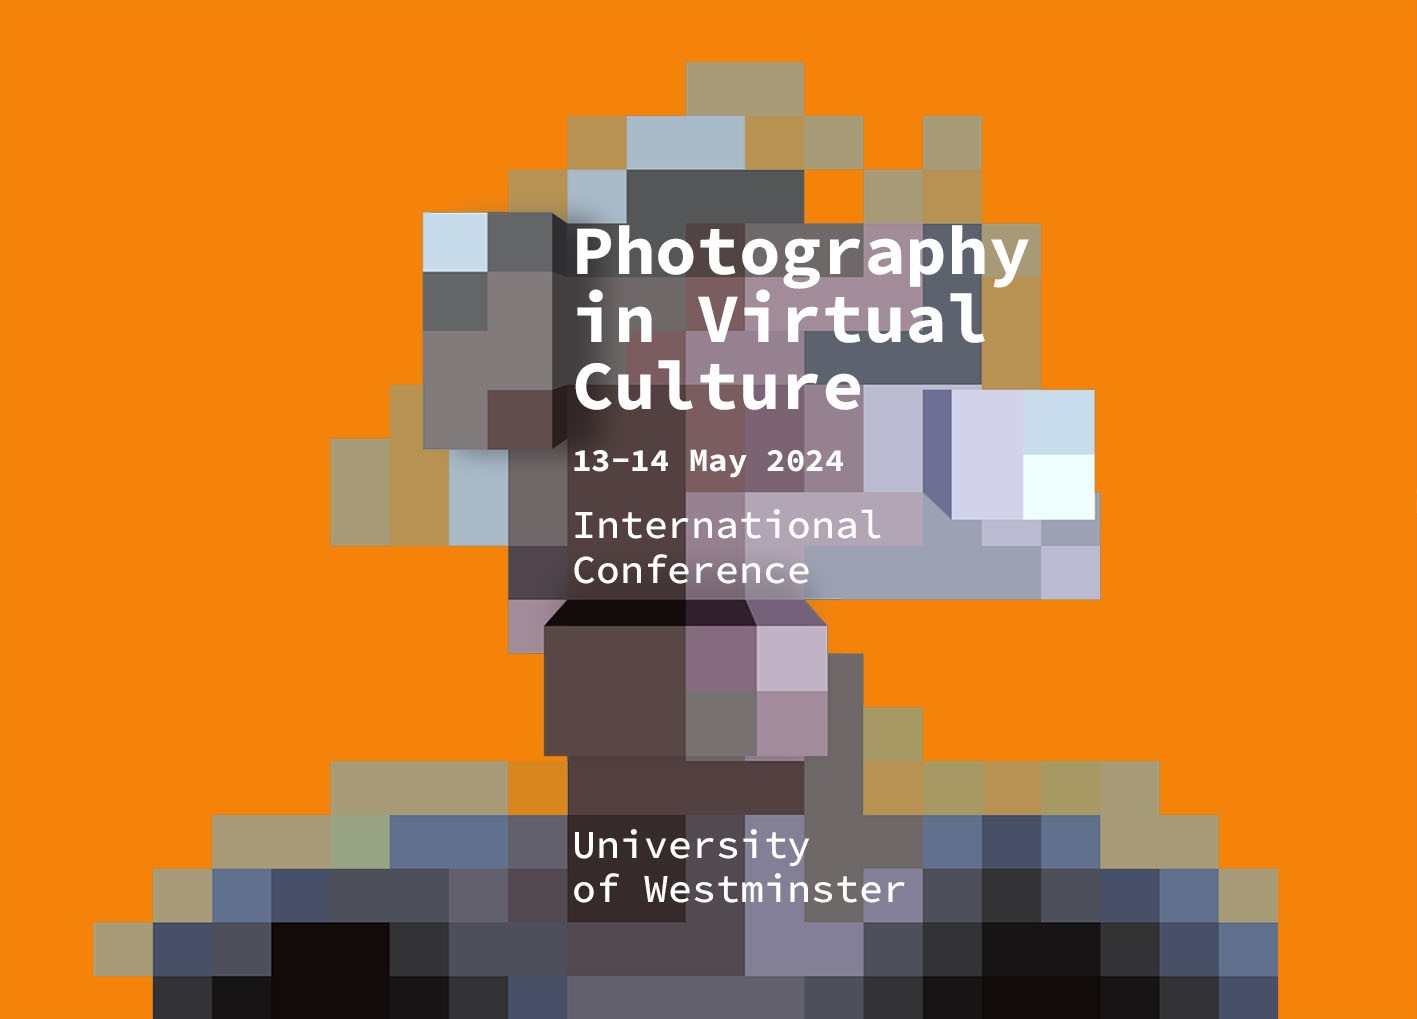 Poster for 'Photography in Virtual Culture', an international conference, hosted by the University of Westminster, 13-14 May 2024.